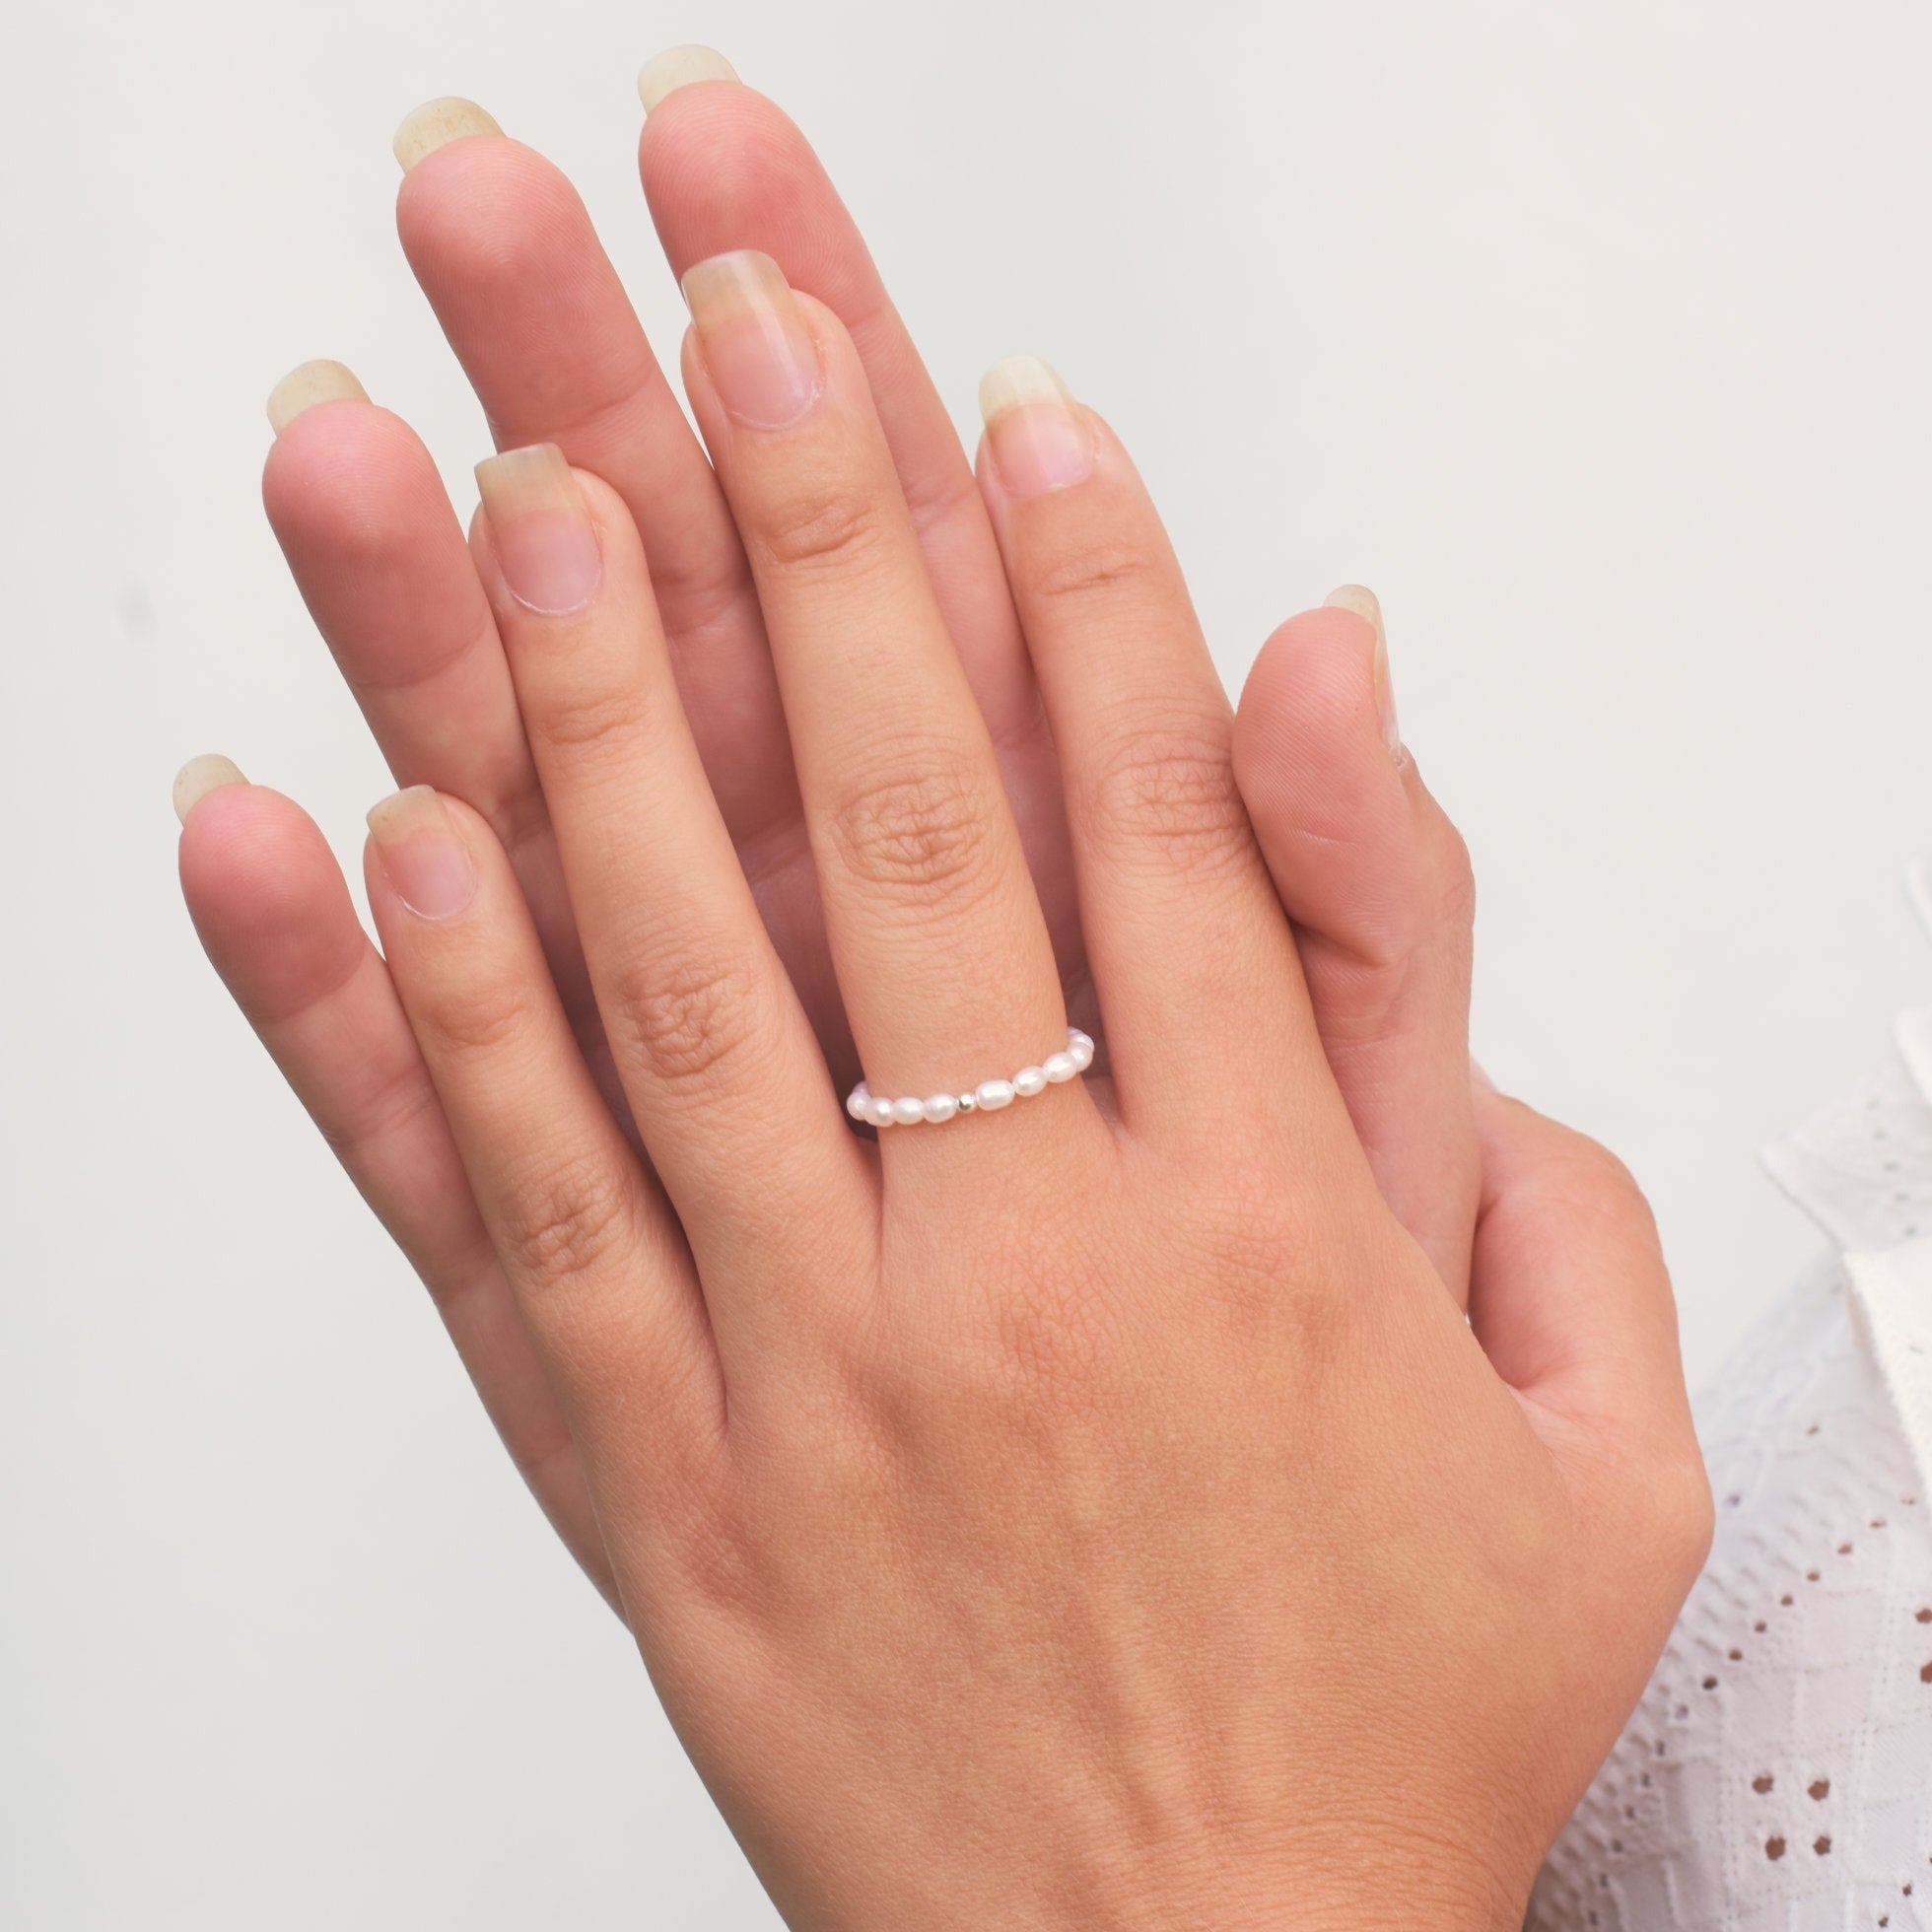 Hands together wearing a mini pearl ring